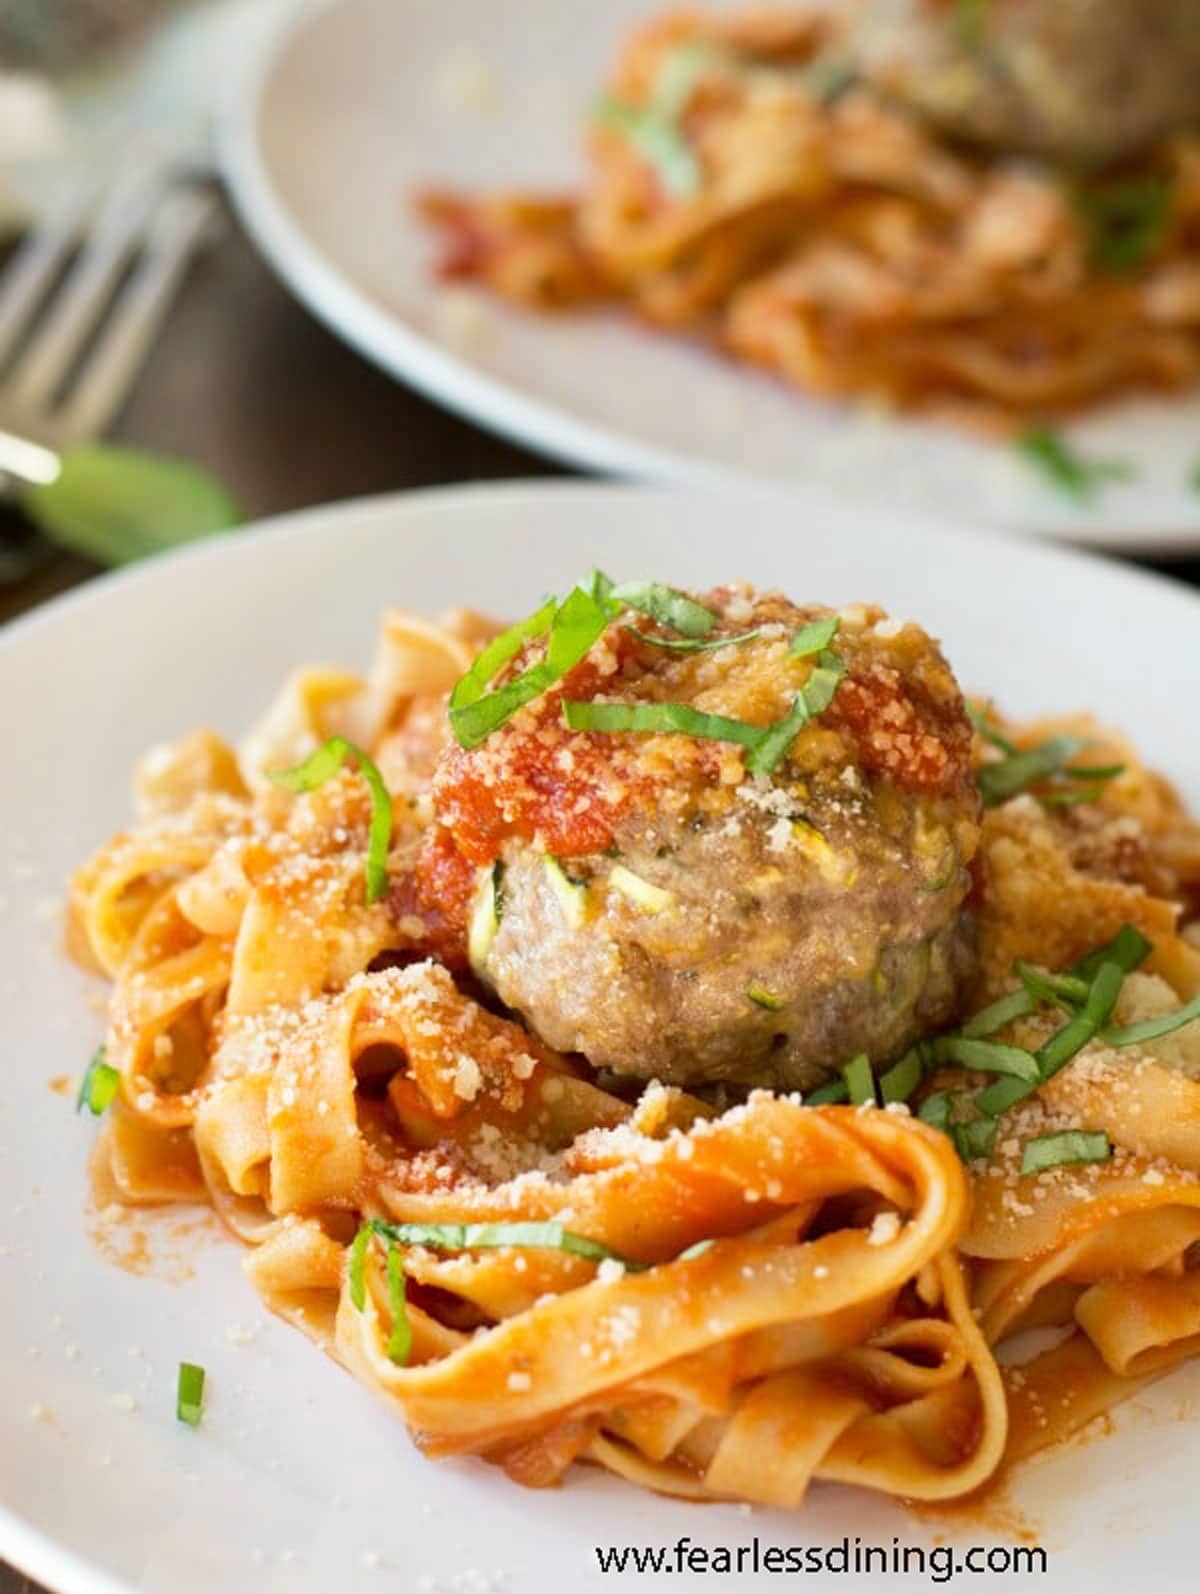 A plate with gluten free pasta with a large meatball on top.